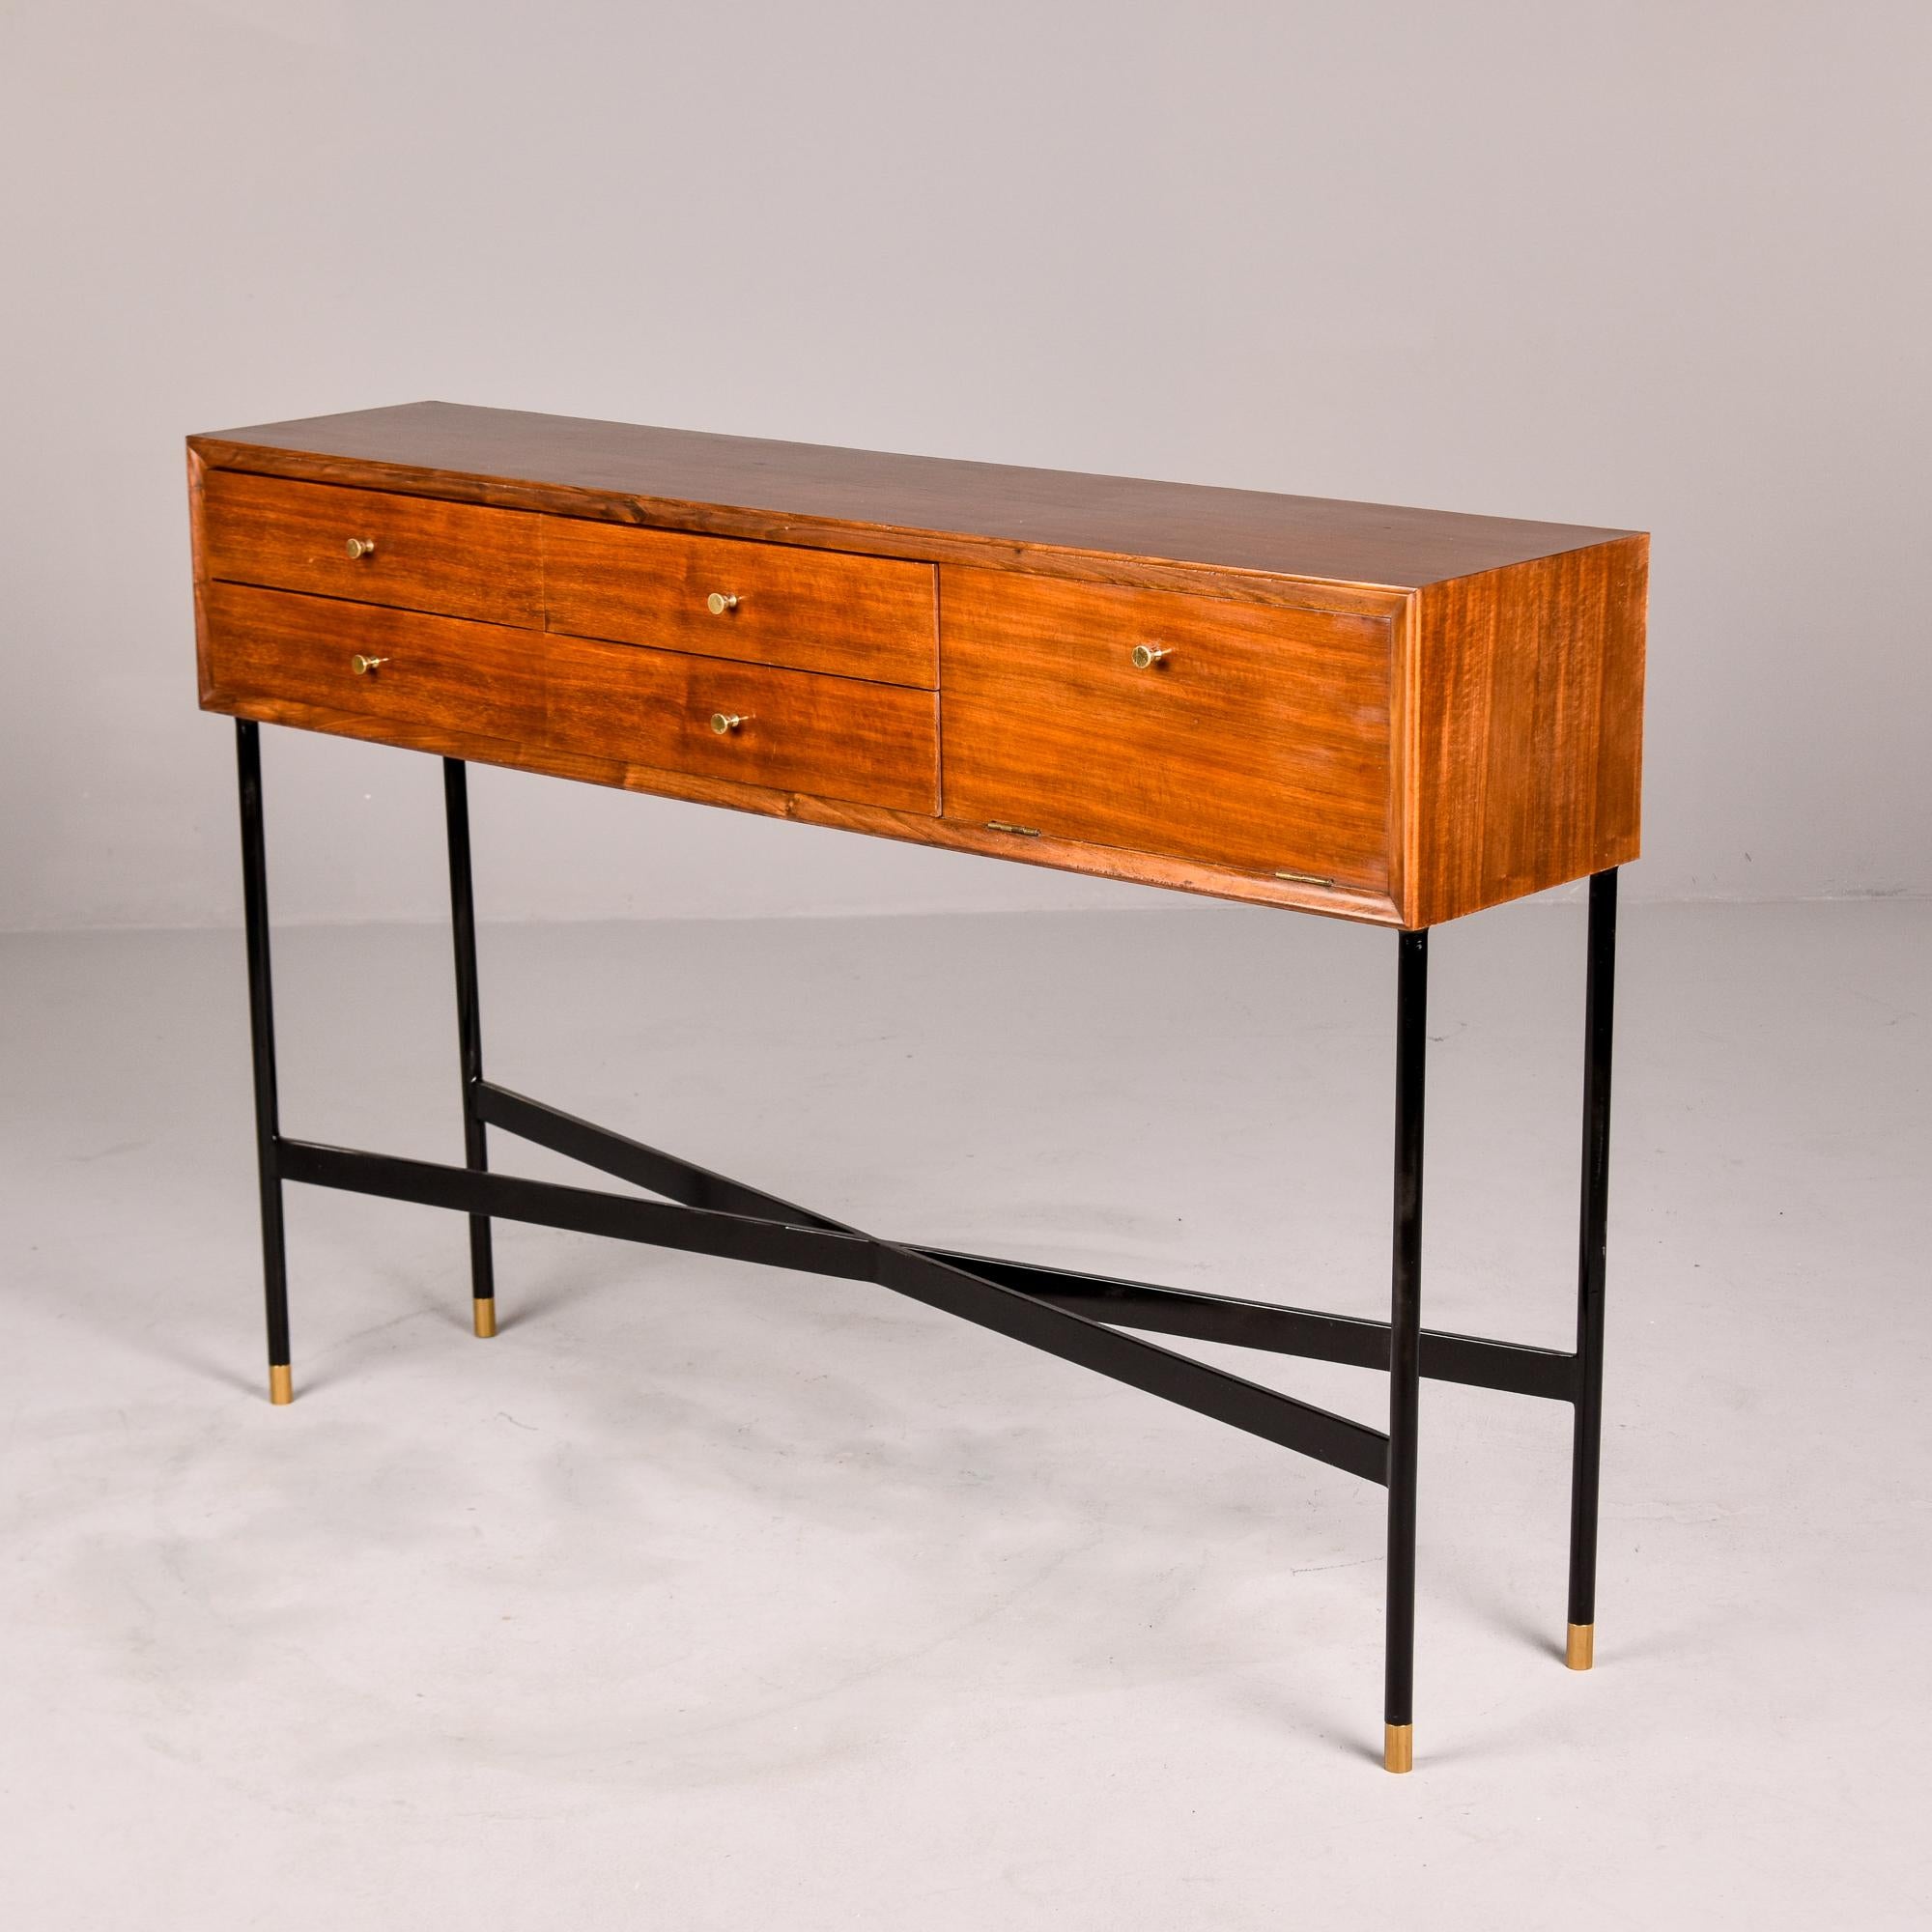 Found in Italy, this slender wood console cabinet on a metal base dates from the early 1960s. The cabinet features four functional drawers with minimalist brass knobs and a storage compartment with drop-down door. Black finished metal base is